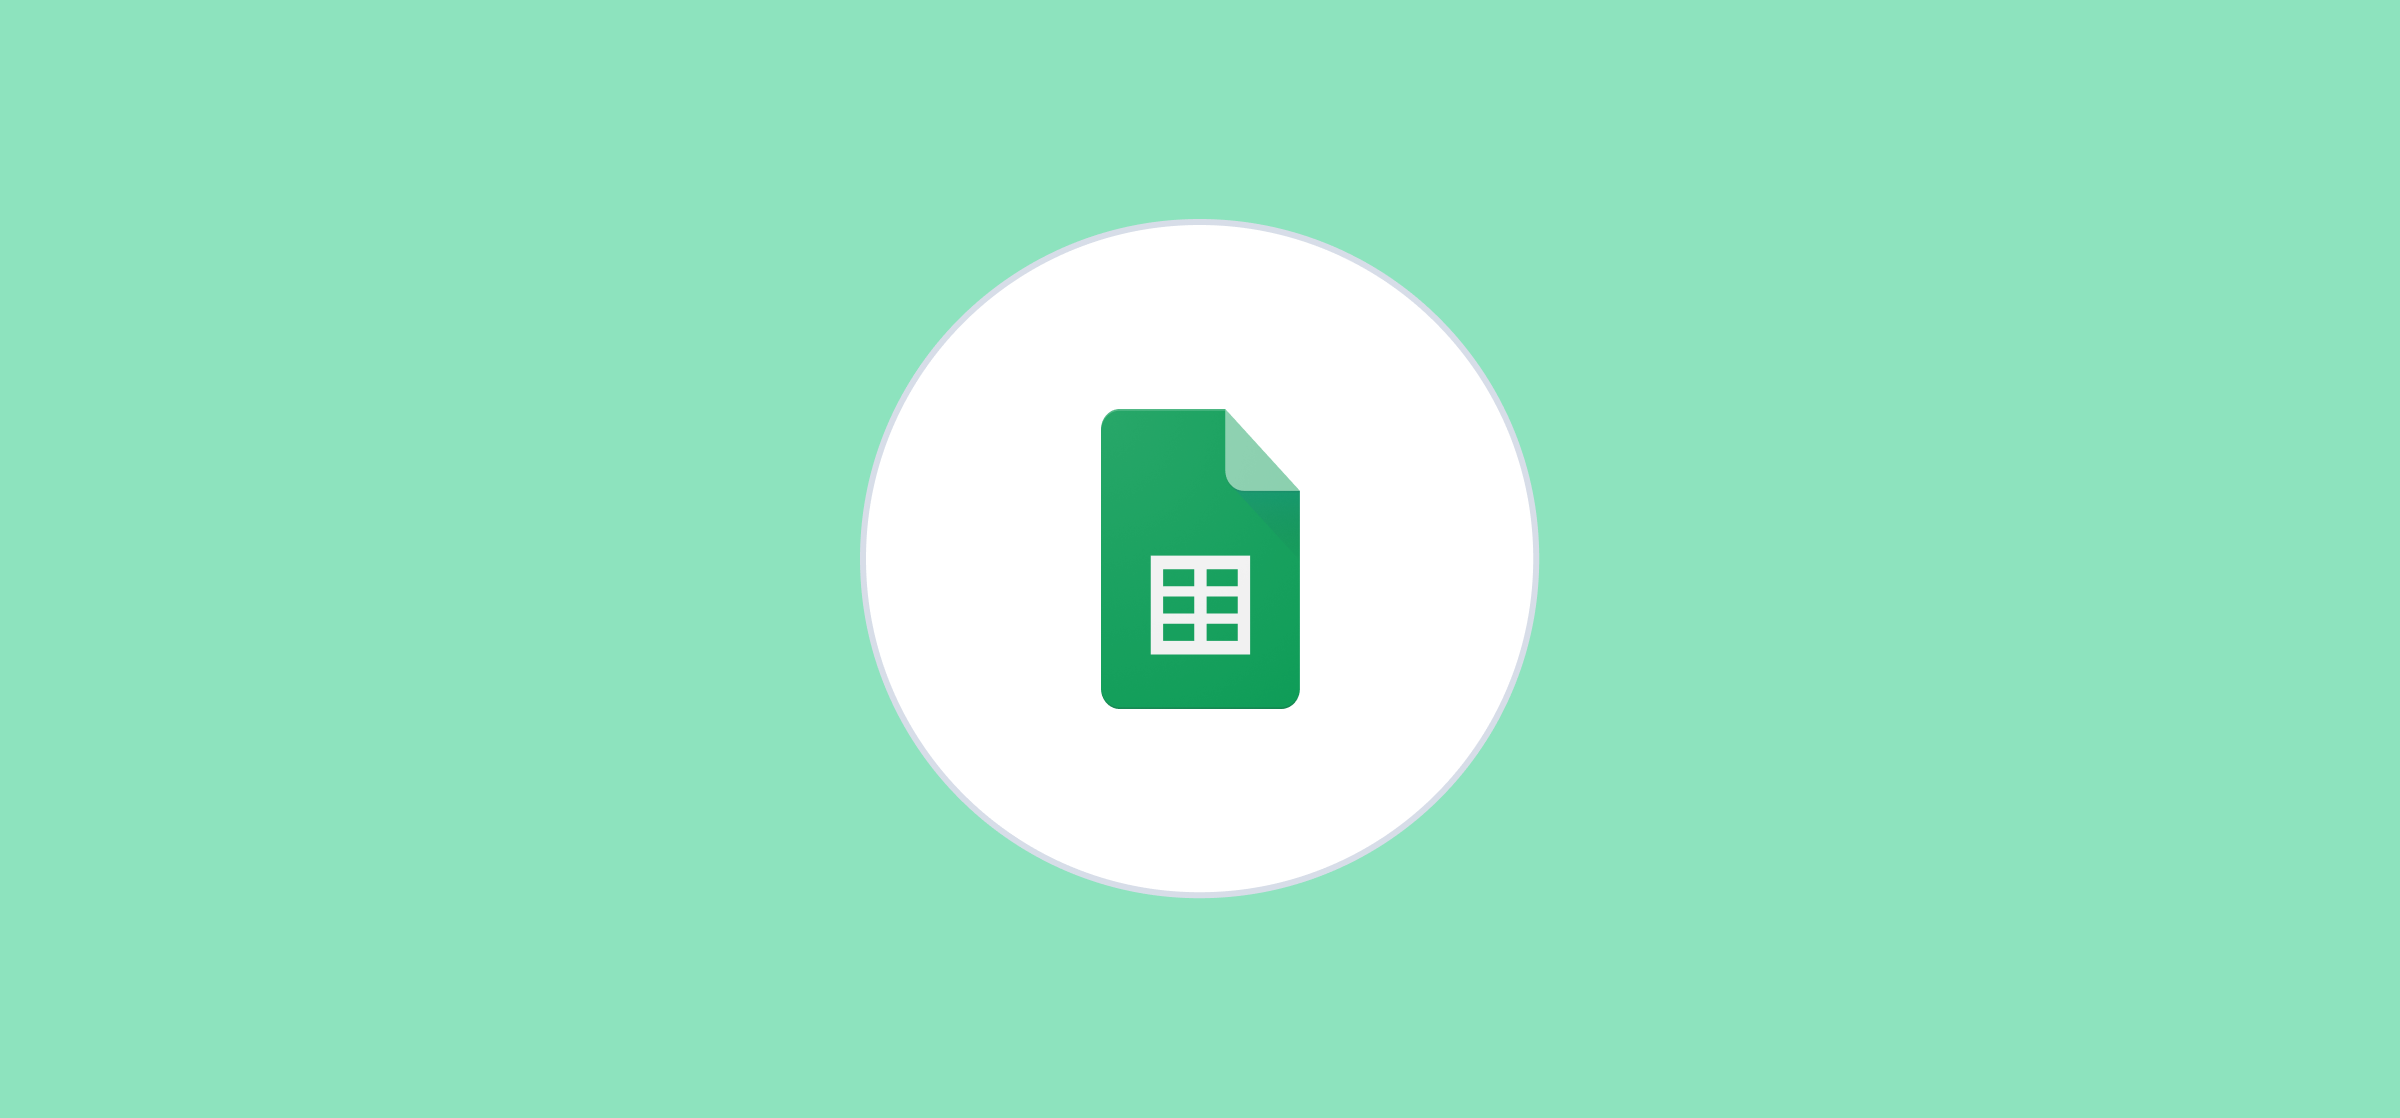 The Google Sheets logo, representing a guide to merge cells in Google Sheets.